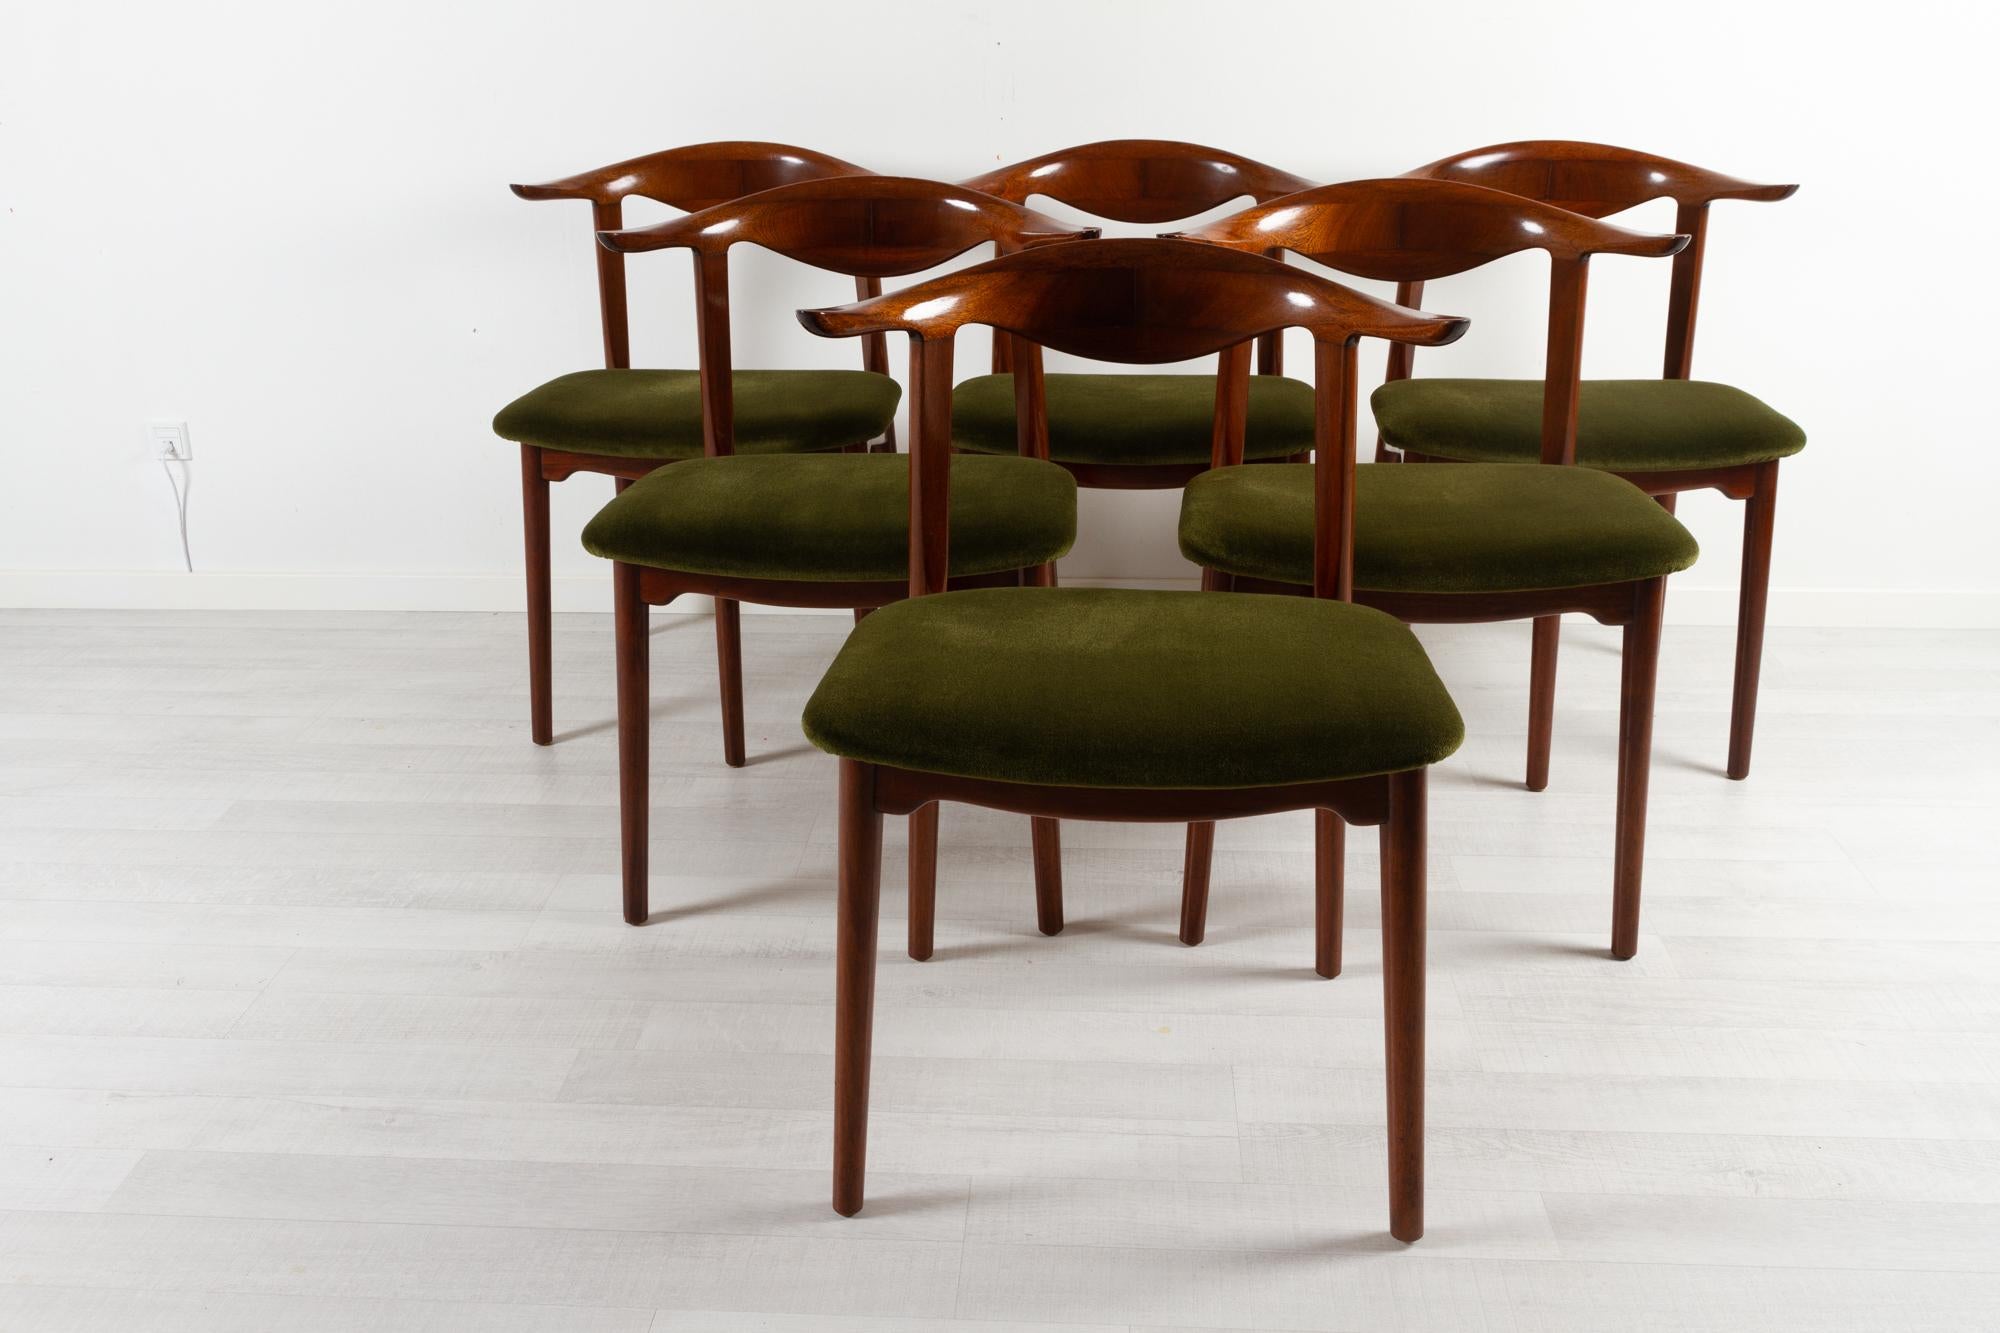 Vintage Danish Mahogany cowhorn chairs 1940s, Set of 6
Early mid-century modern cow horn chairs in solid mahogany made in Denmark. Sculptural backrests with beautiful lines. Round tapered legs. Wooden frame and back lacquered in clear gloss. Seats